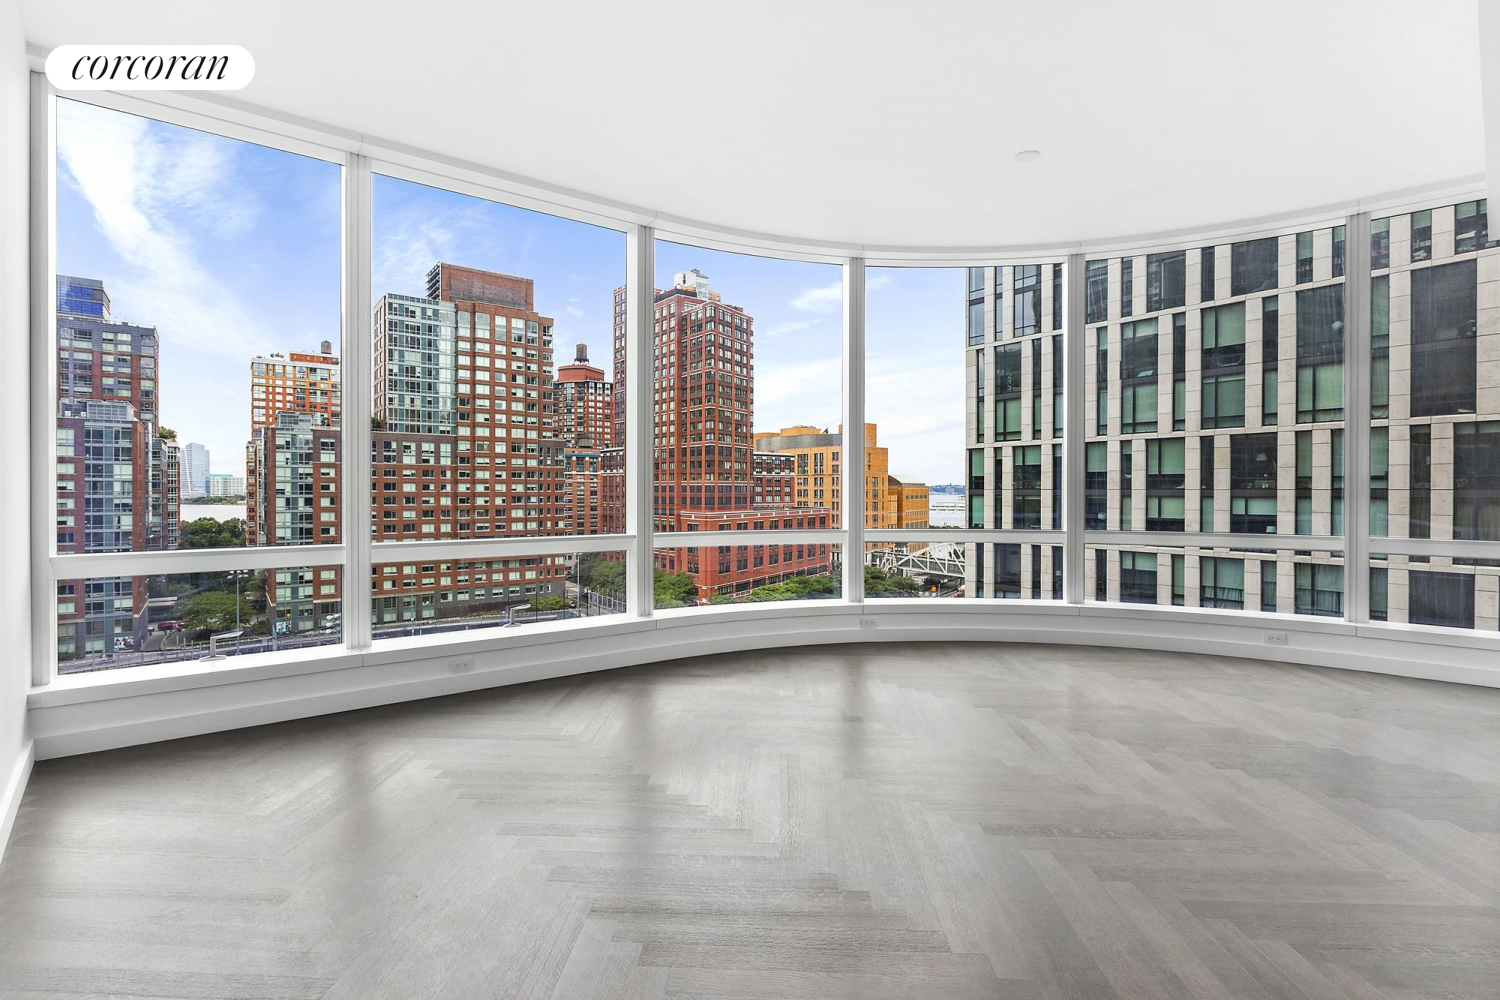 111 Murray Street 11W, Tribeca, Downtown, NYC - 3 Bedrooms  
3.5 Bathrooms  
6 Rooms - 